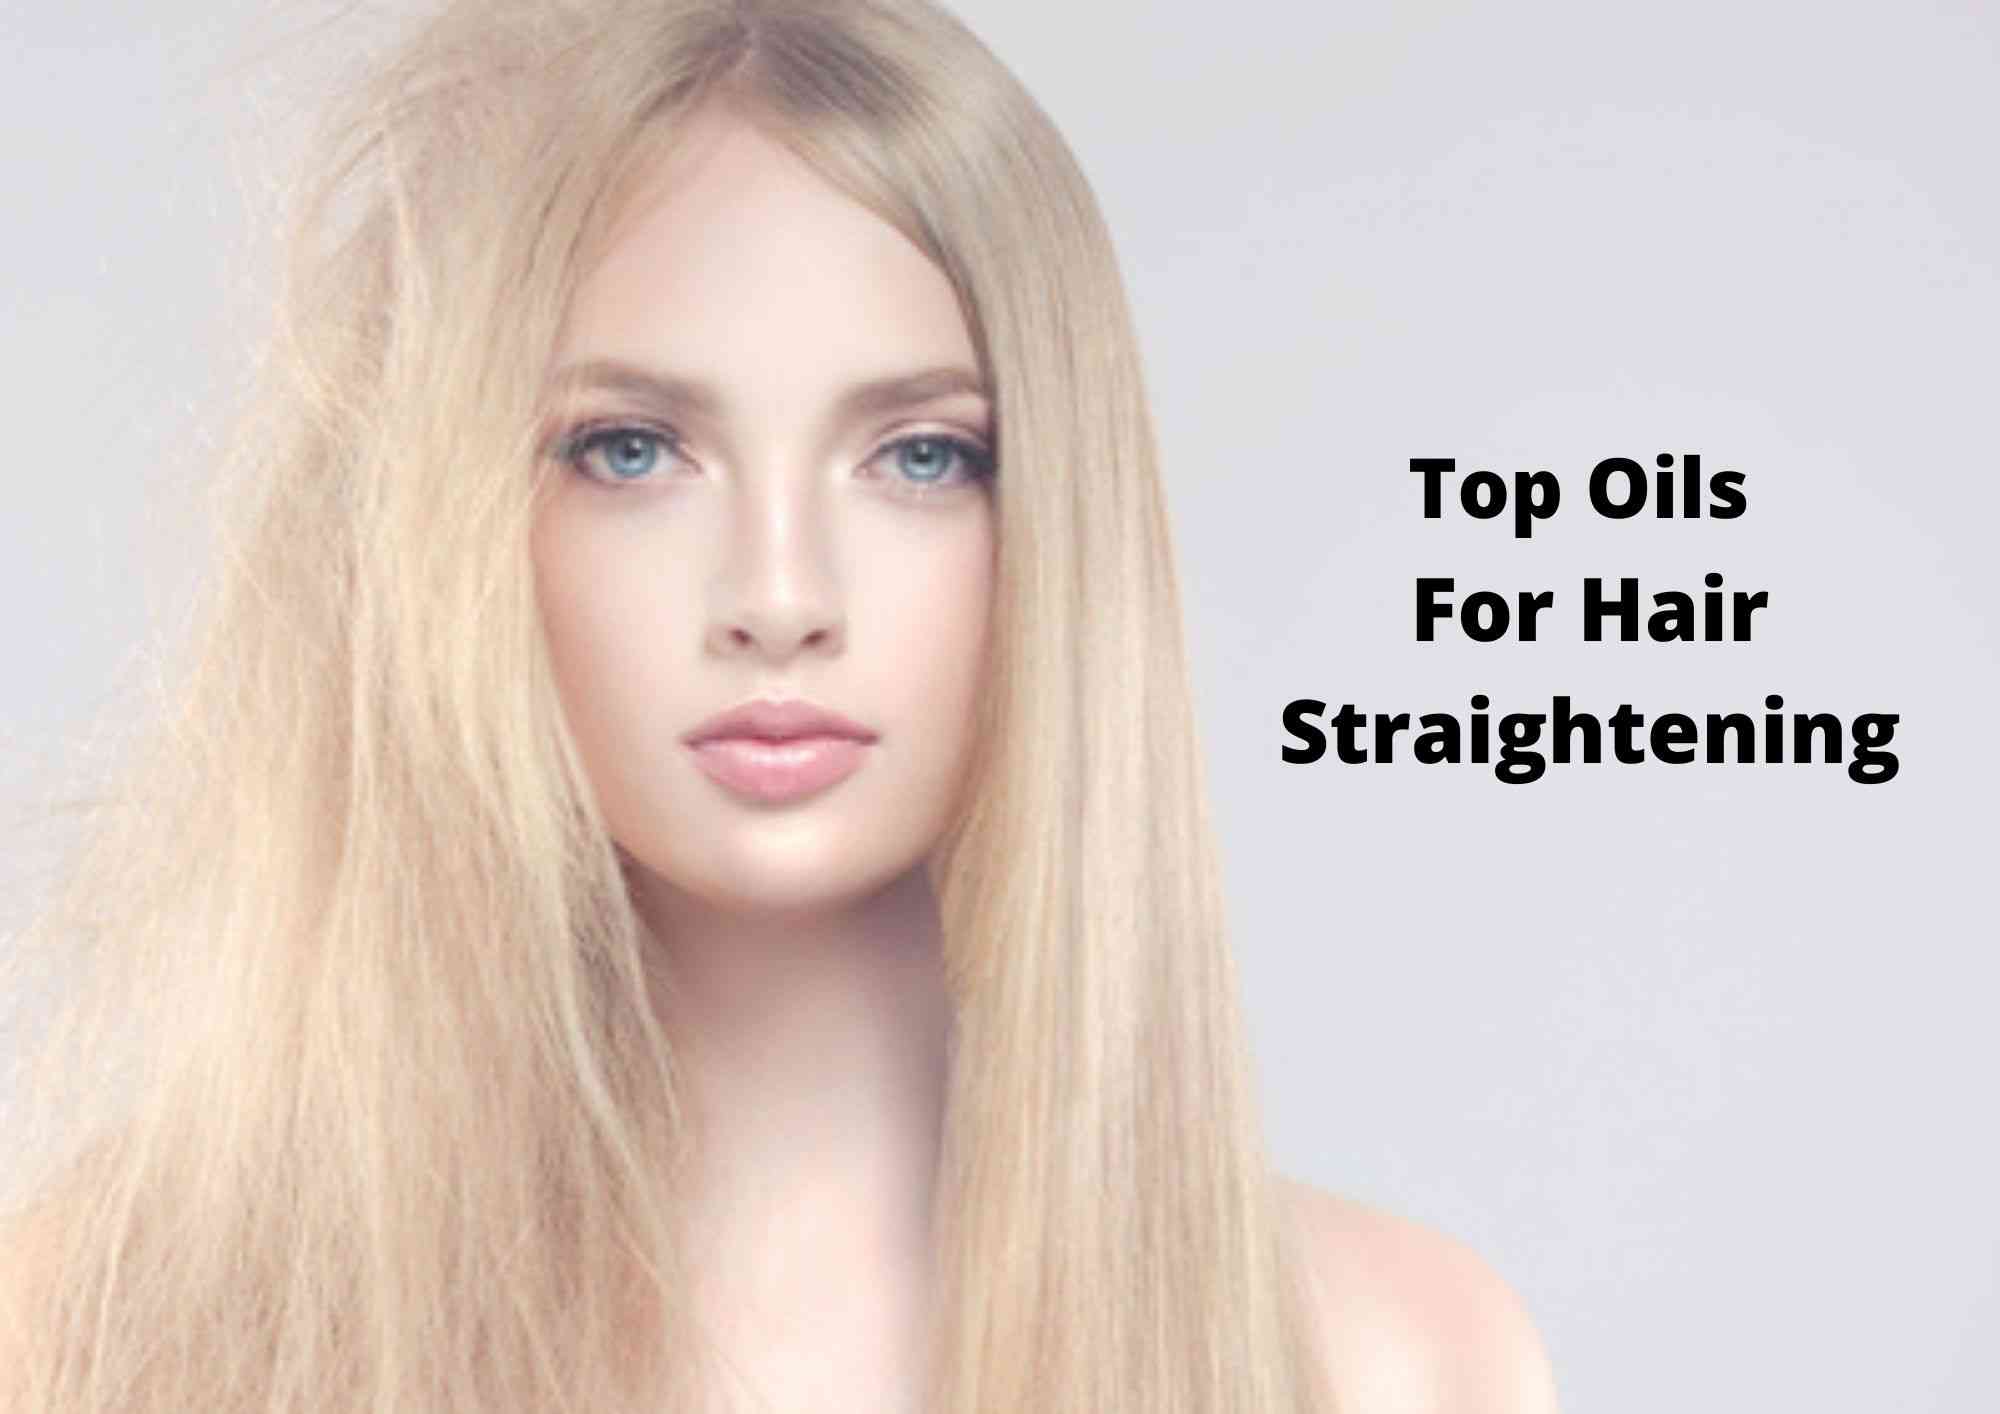 5 Best Oil For Straightening Hair 2023 - Hair Everyday Review